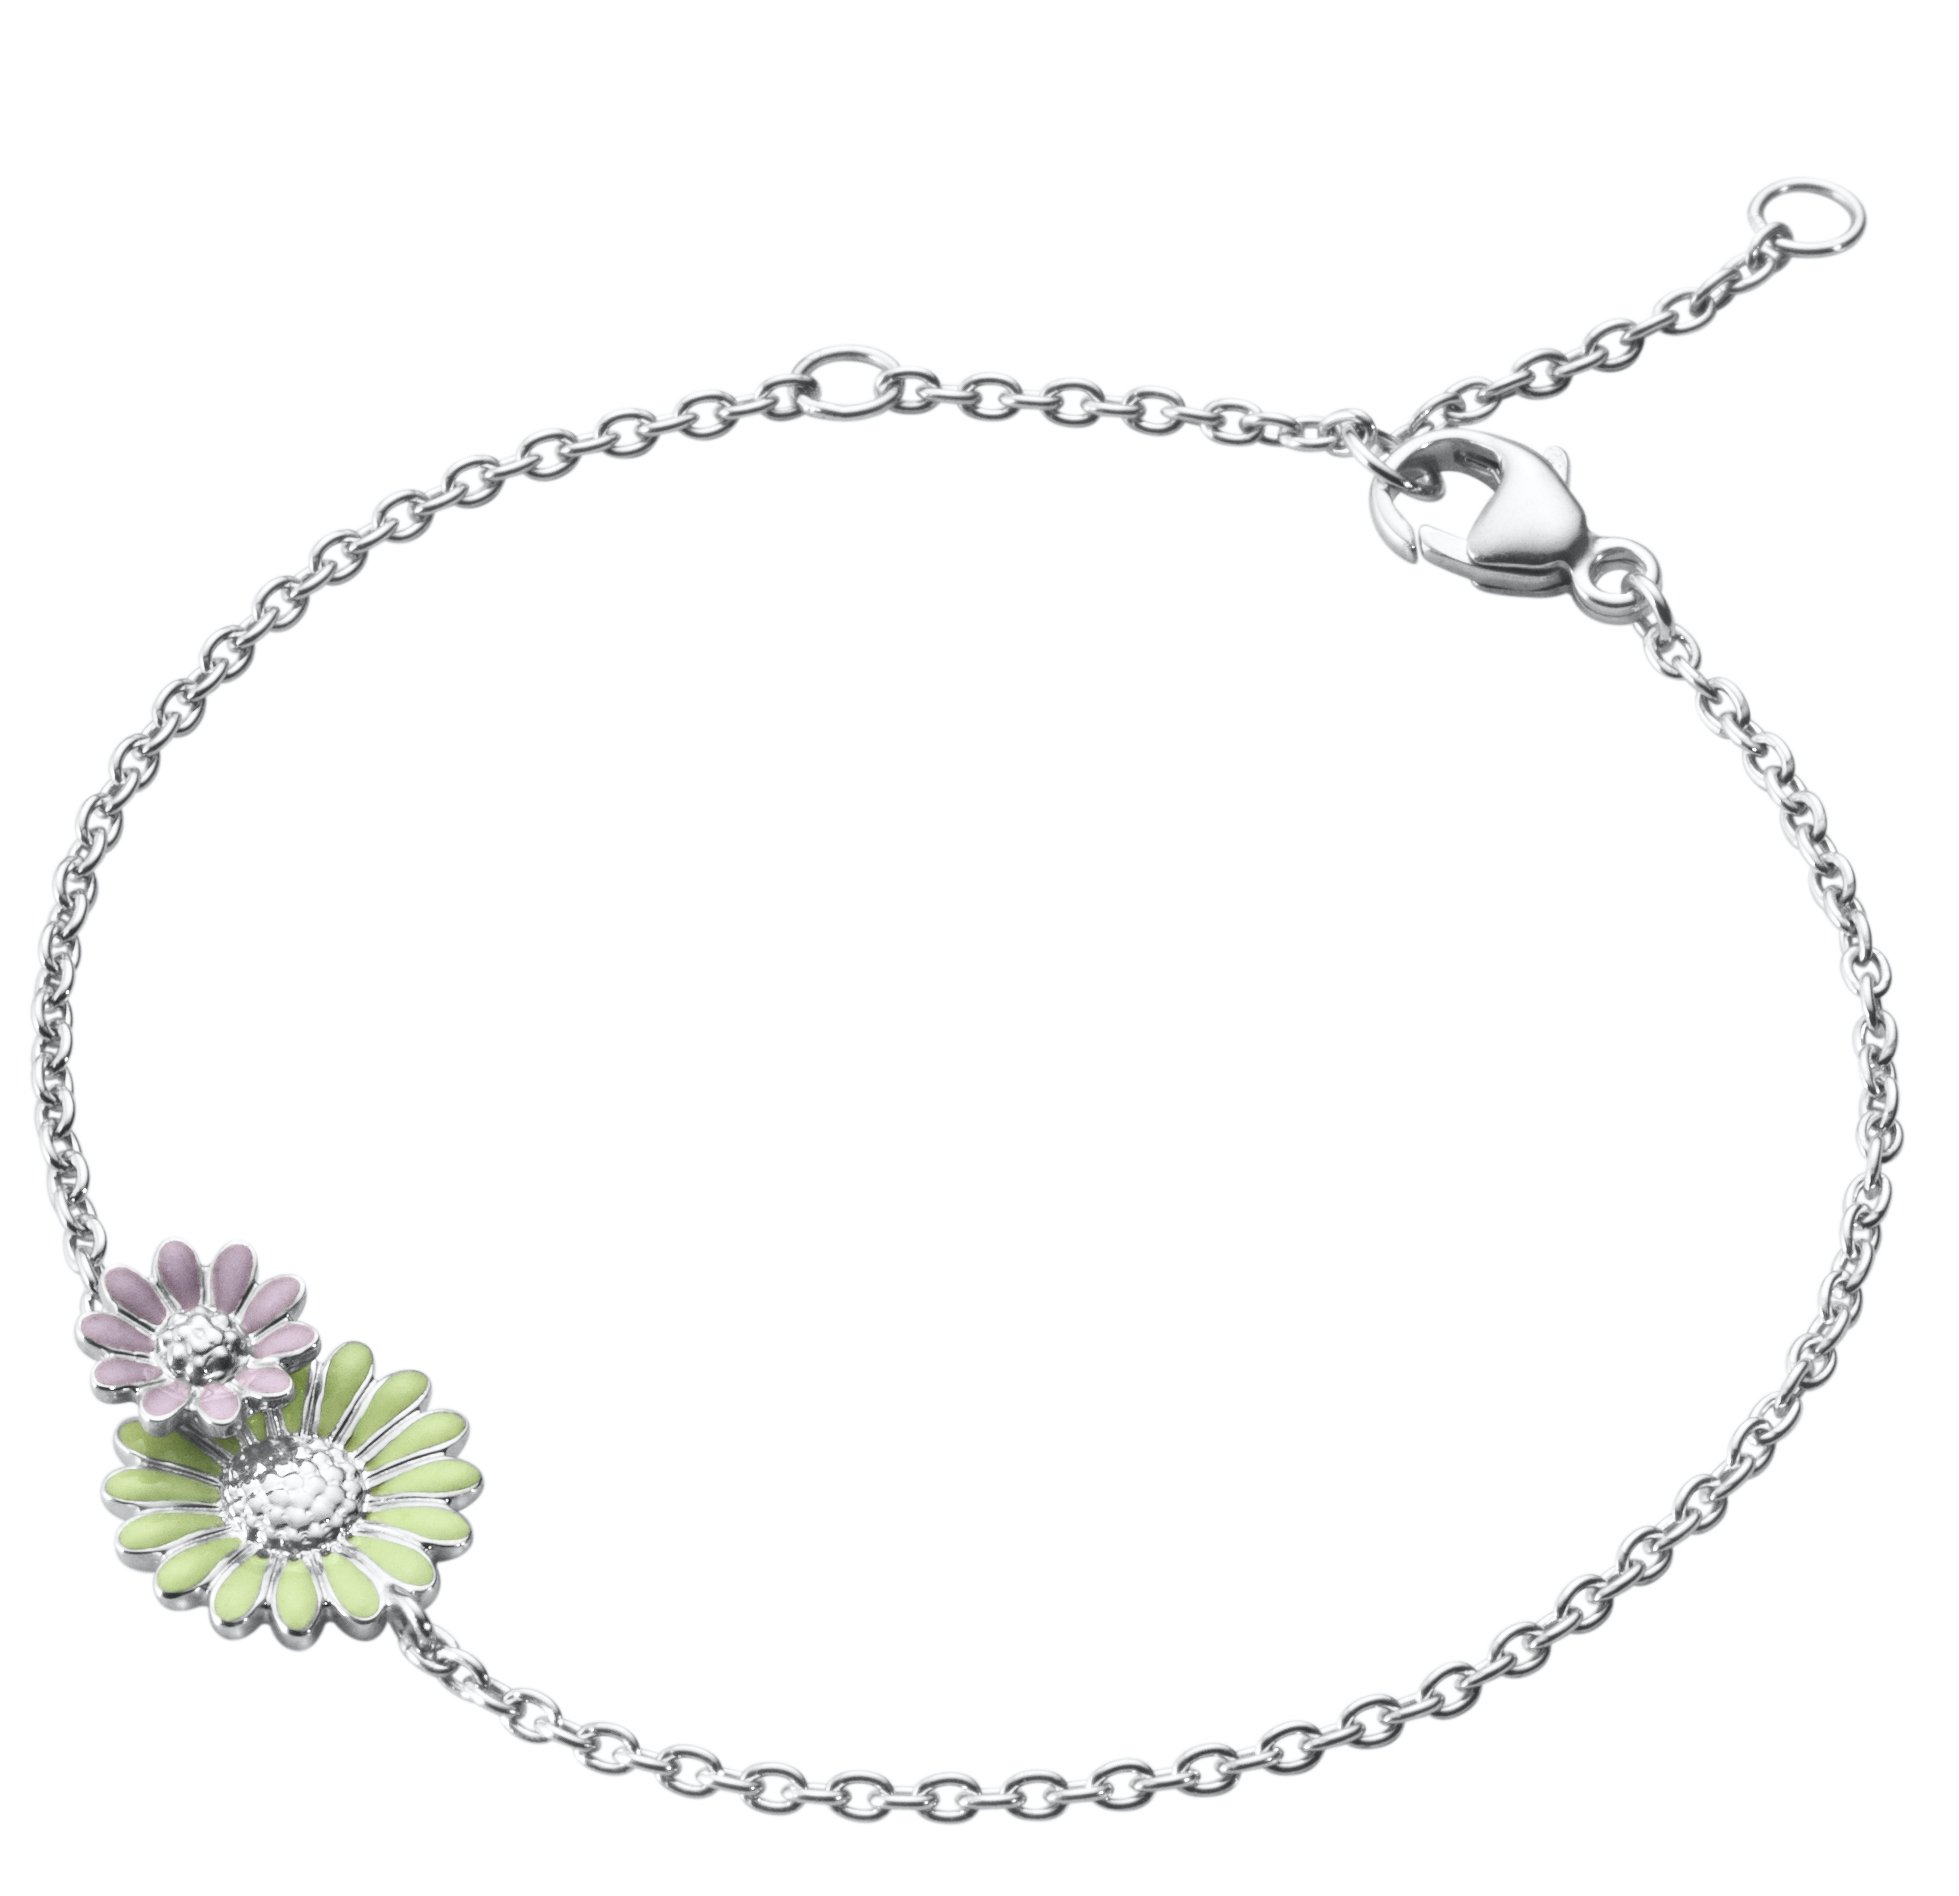 Georg Jensen - Daisy, Sterling Silver Bracelet 20001115 | Guest and Philips